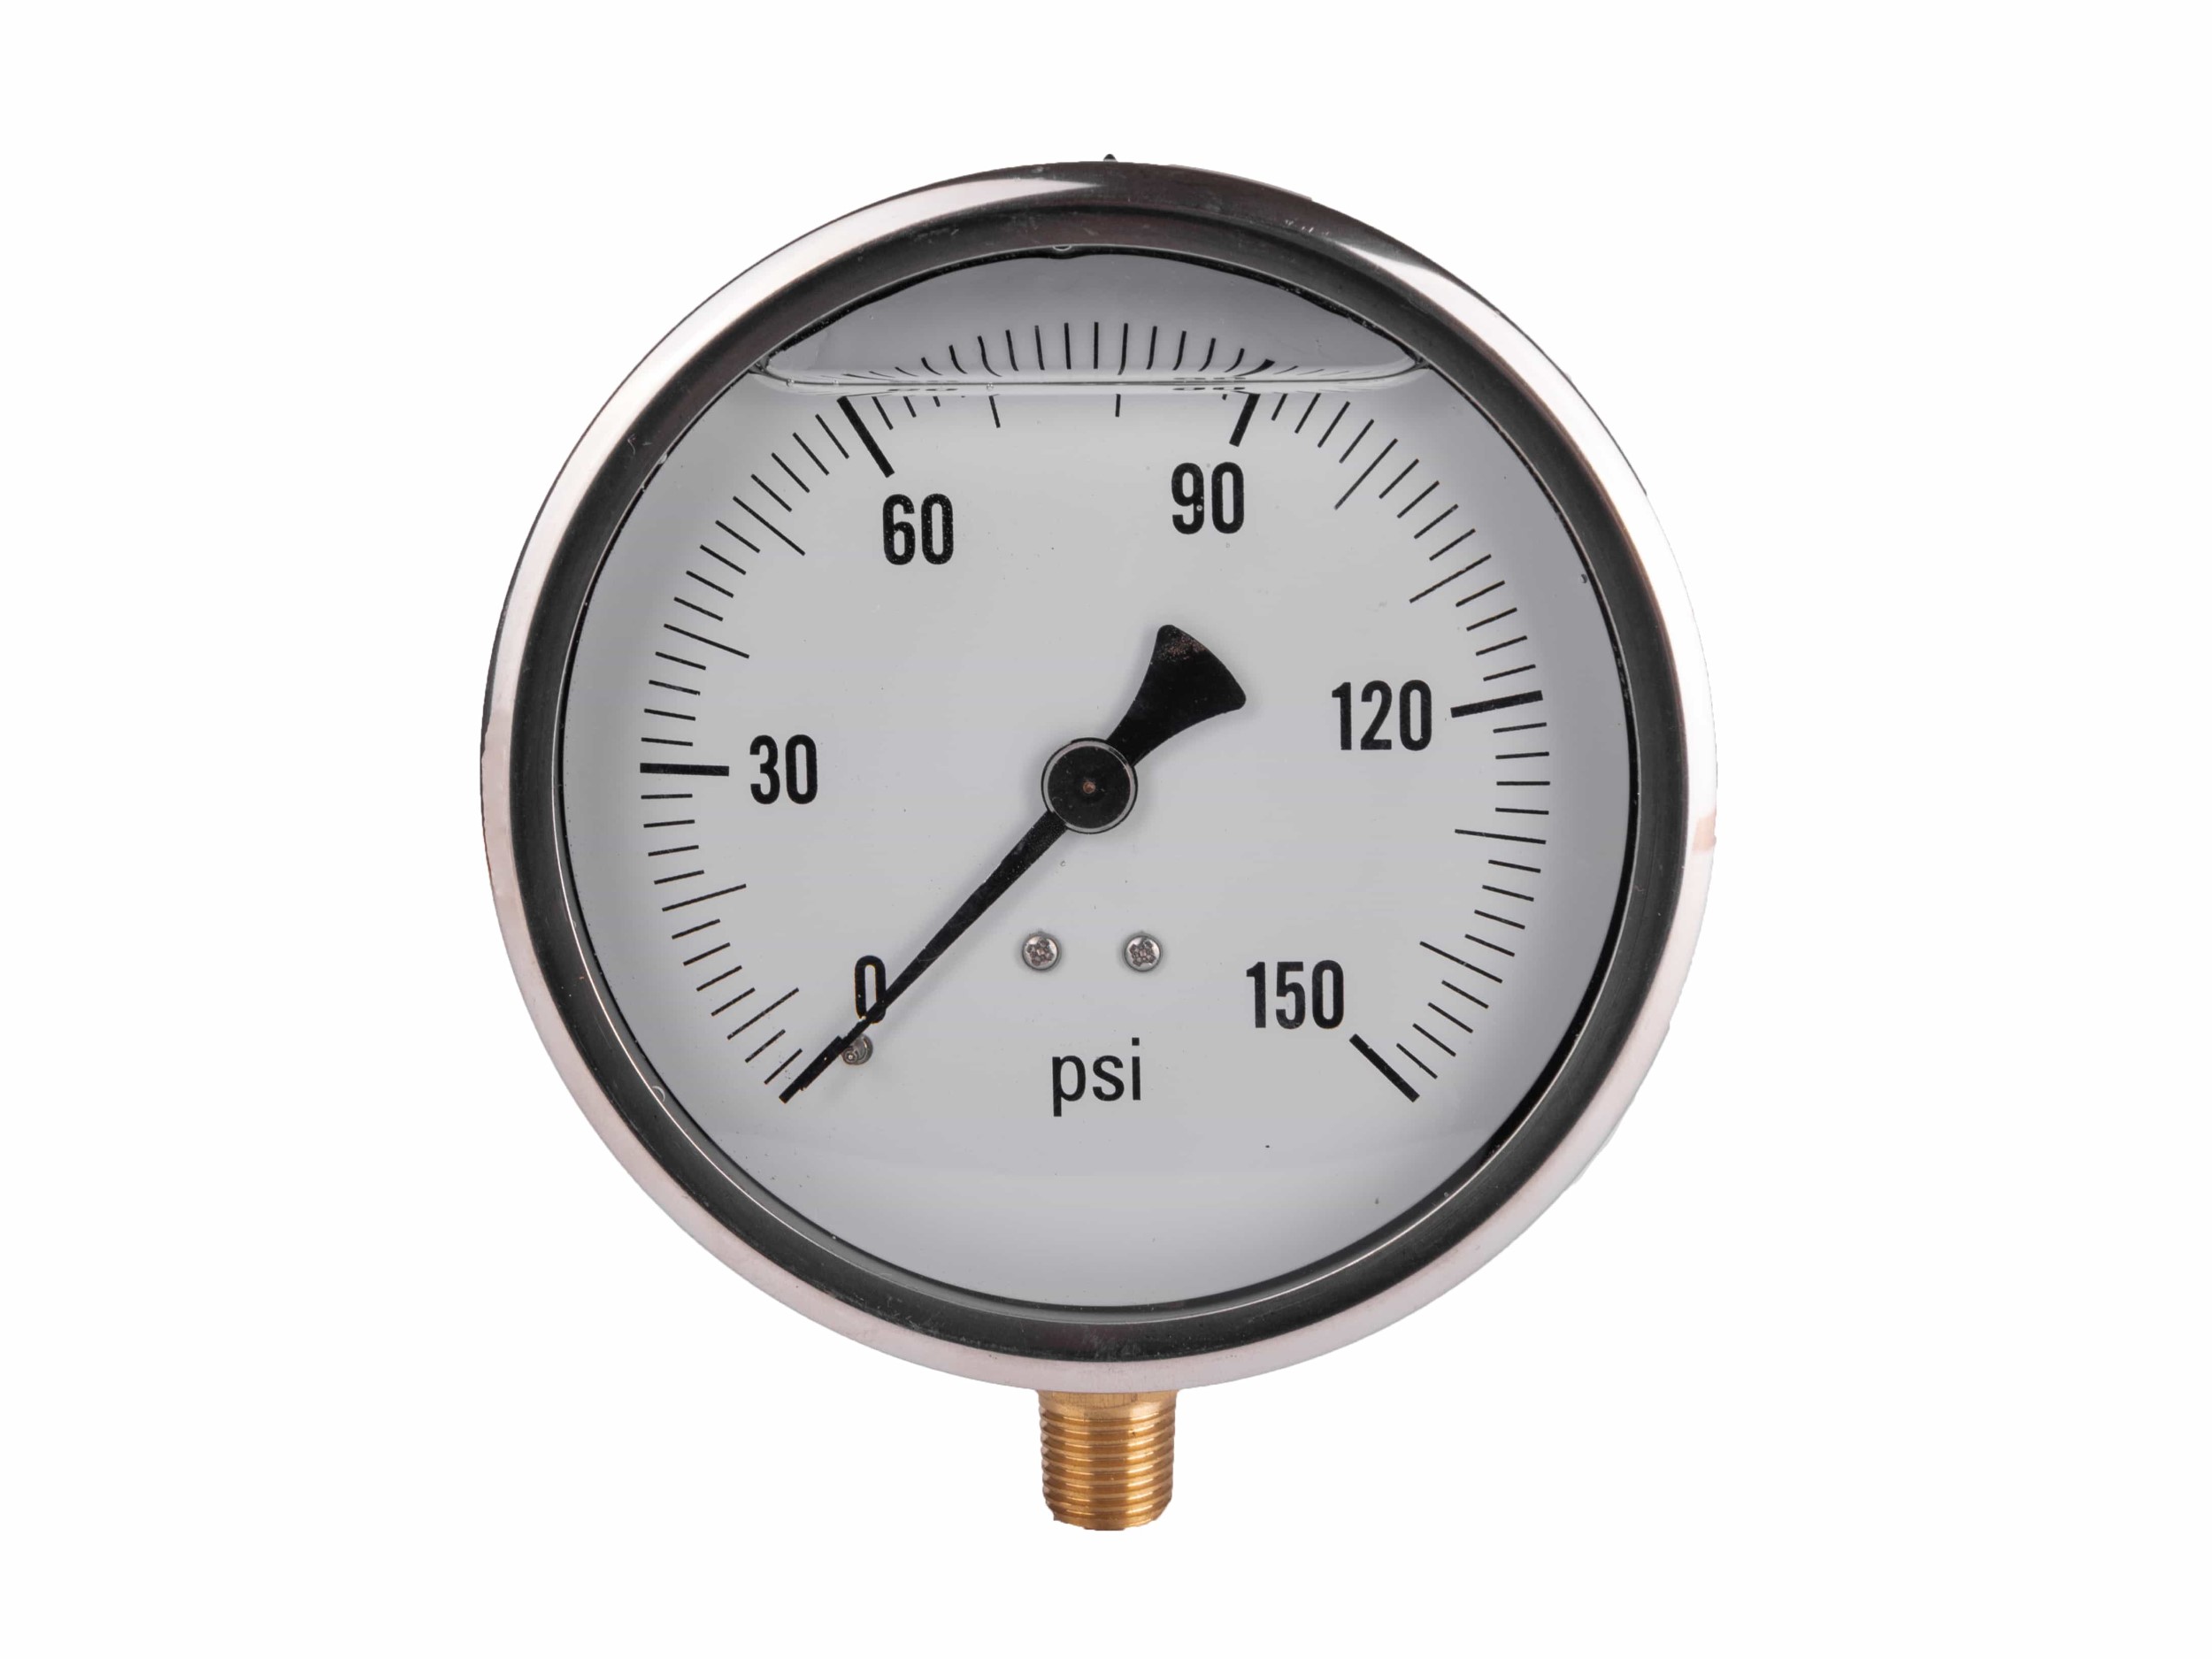 NEW IN BOX * Details about   USG P733 35" 1/4" PRESSURE GAUGE 